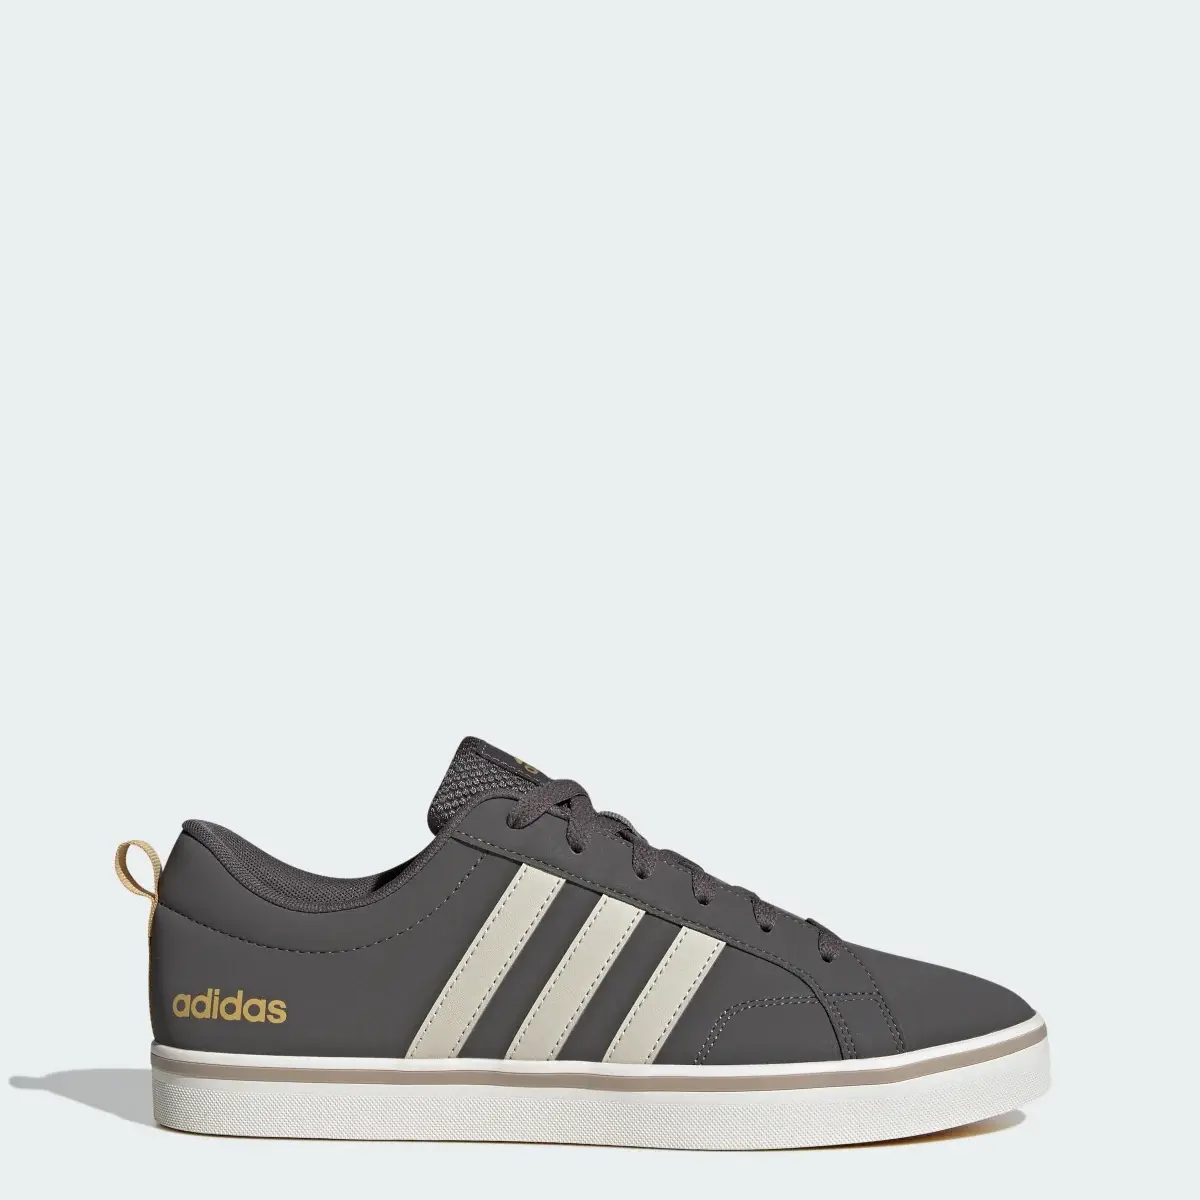 Adidas VS Pace 2.0 Schuh. 1